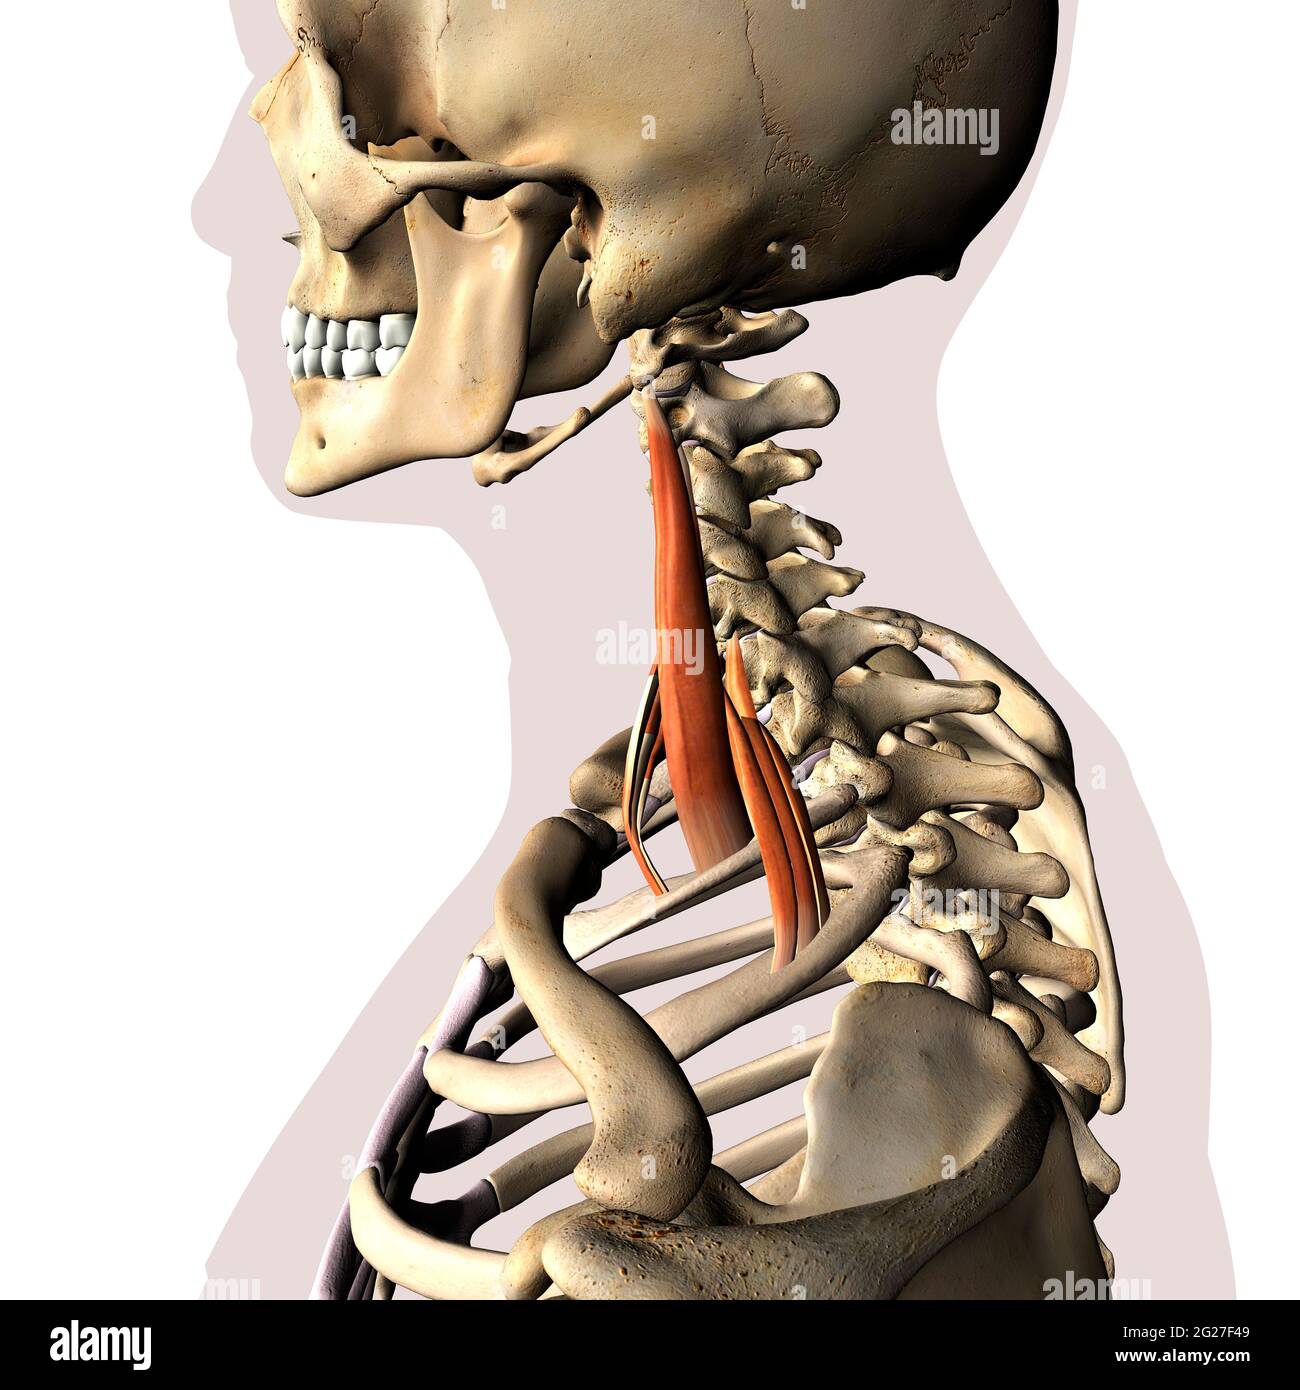 Scalene neck muscles Isolated within skeletal system, on white background. Stock Photo